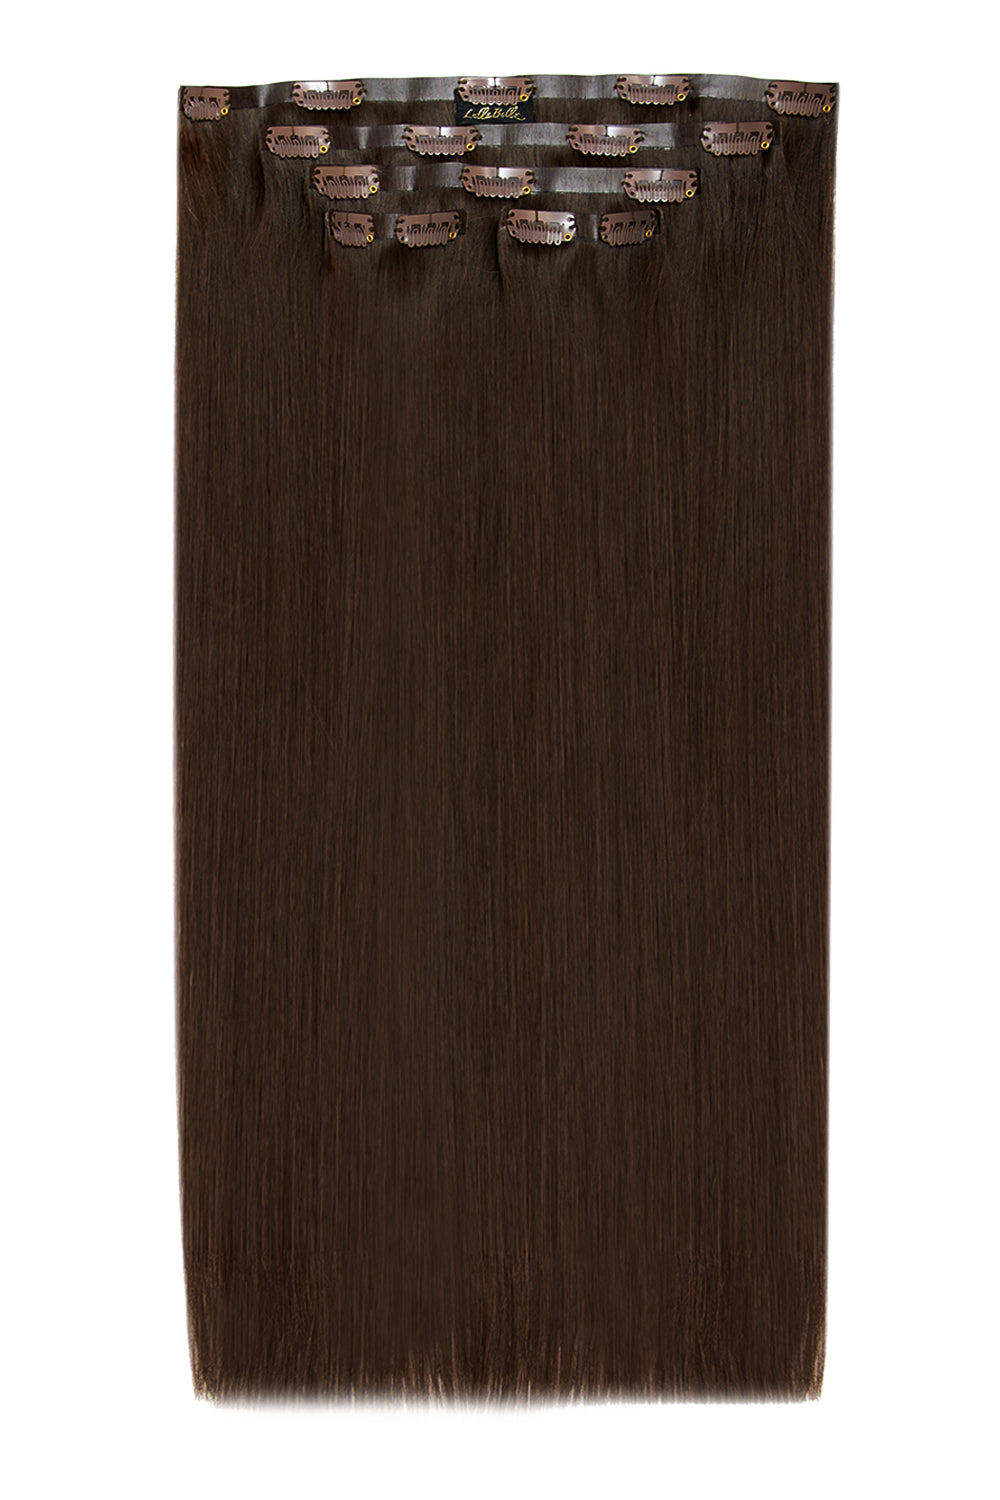 Luxury Gold 20" 5 Piece Human Hair Extensions  - Chocolate Brown